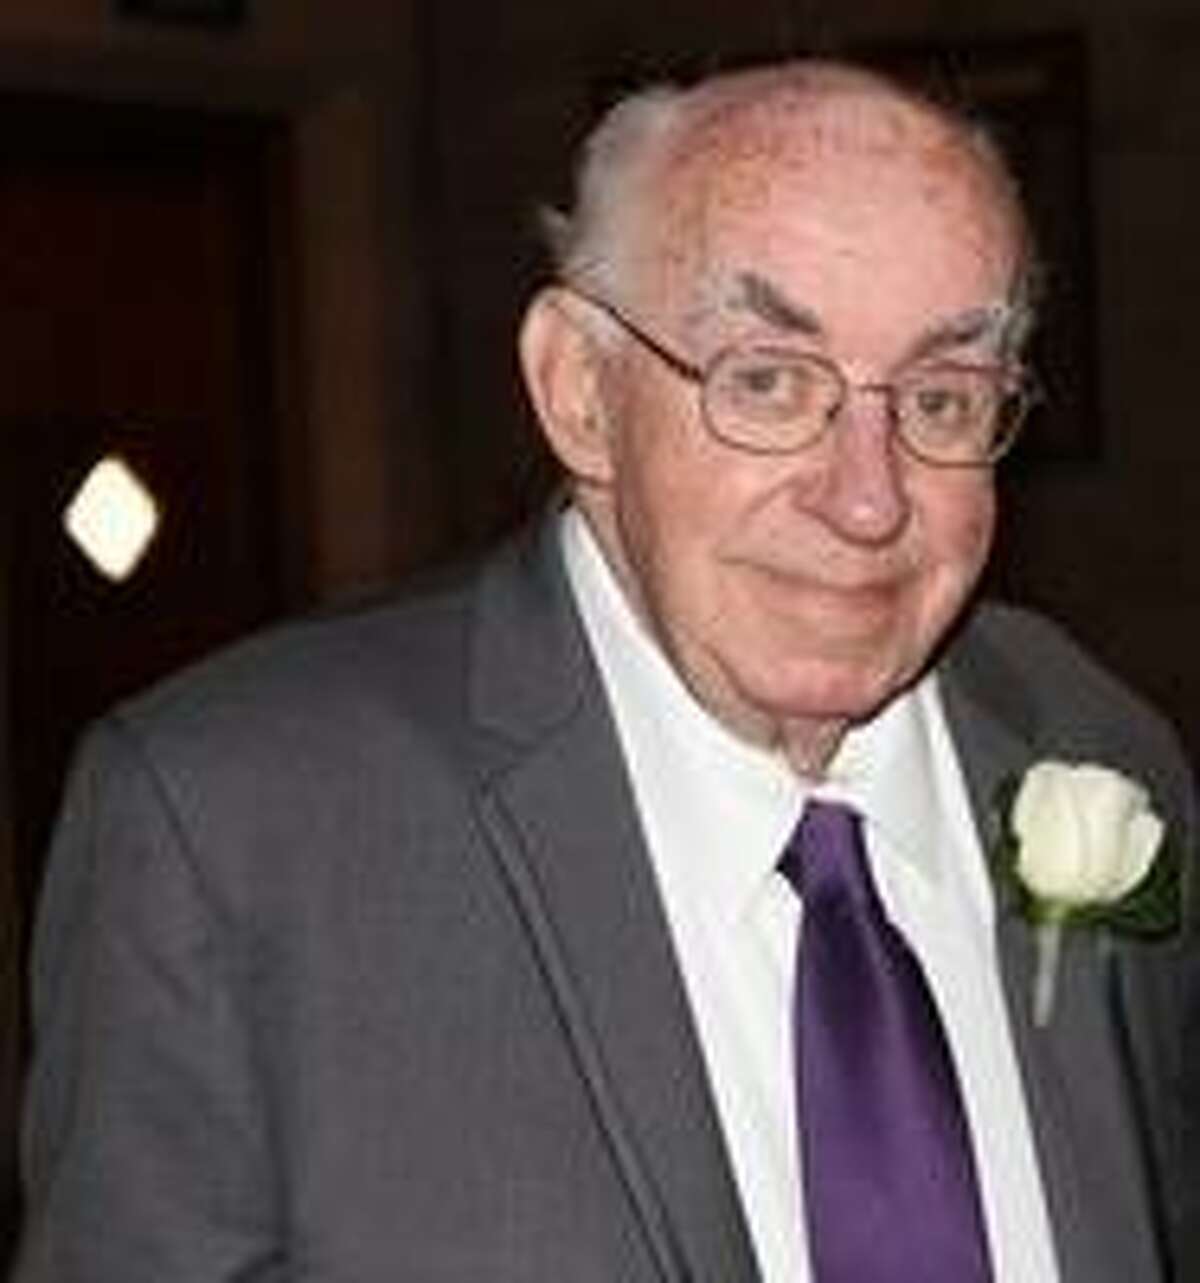 Thomas McGillicuddy, who served Fairfield Preparatory School for more than four decades, died on Jan. 4, 2018. During his 42 years at Prep, he served as math teacher, principal, dean of men, guidance and college placement counselor and controller. He was also the school’s Dean of Discipline.